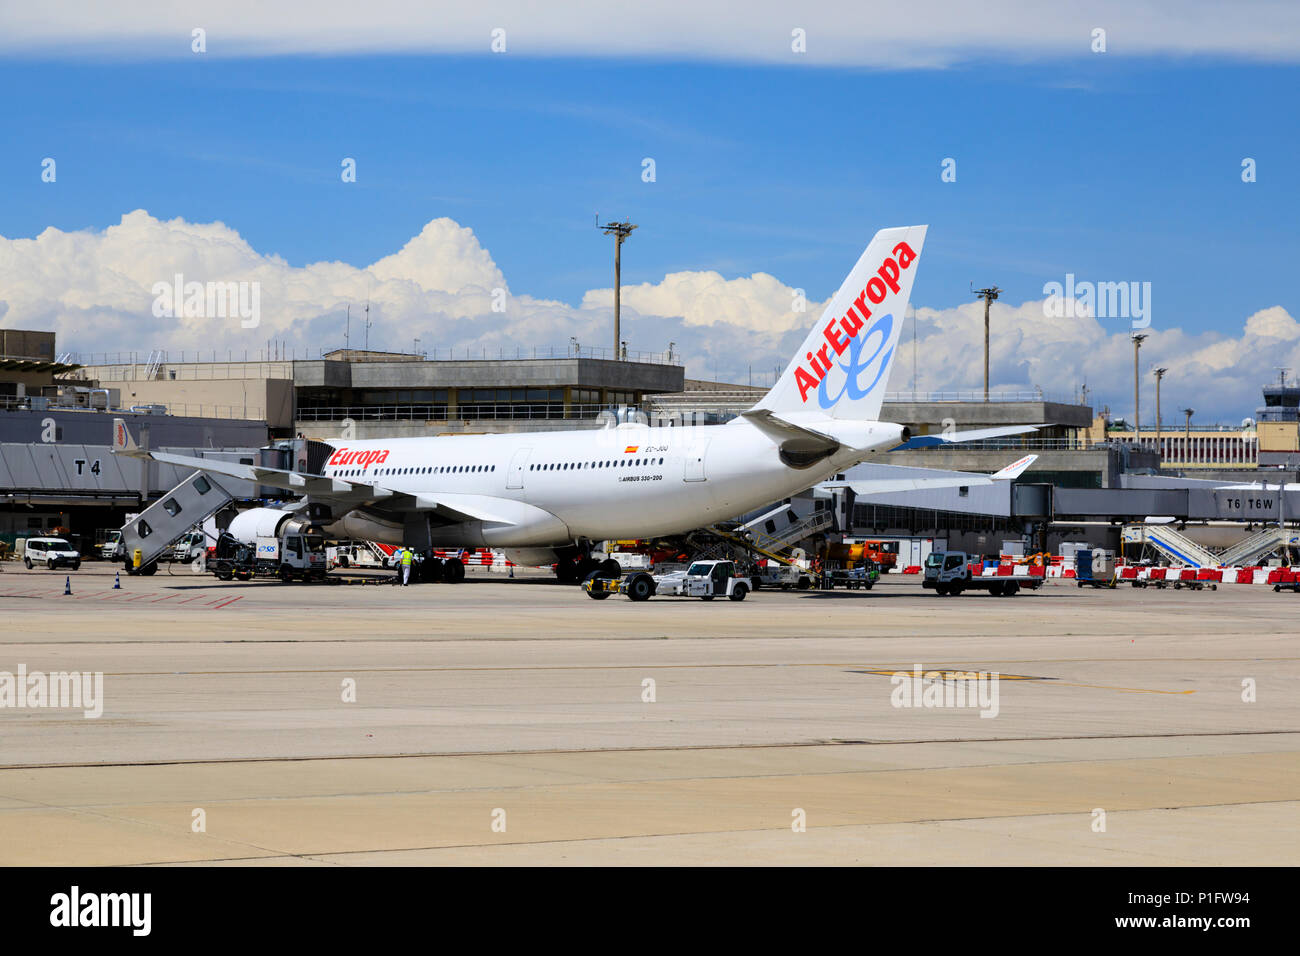 Air Europa Airbus A330-202 airliner. Adolfo Suarez Barajas airport, Madrid, Spain. May 2018 Stock Photo